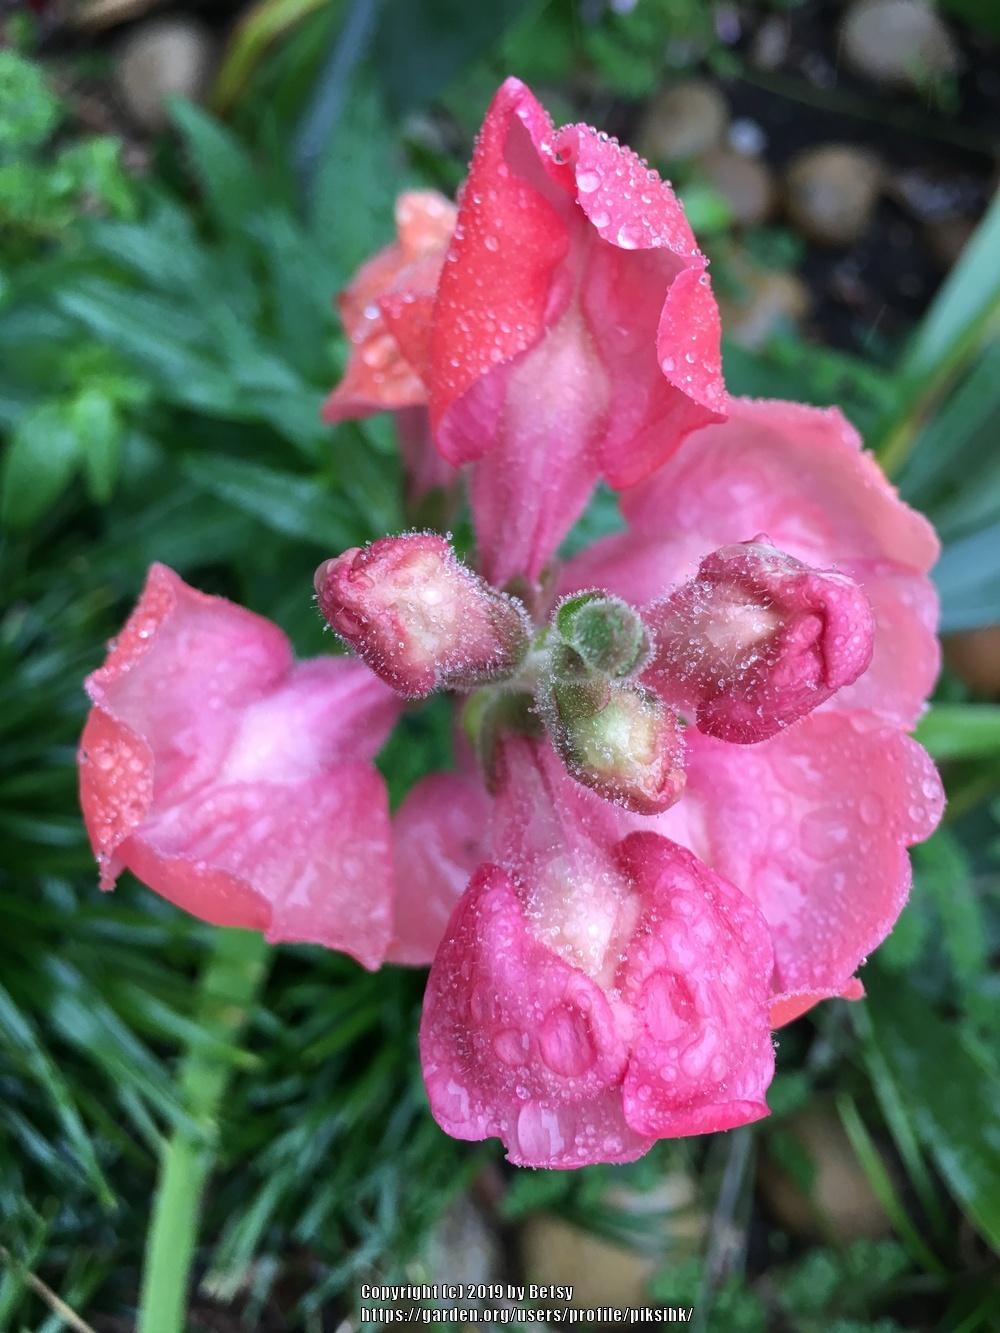 Photo of Snapdragon (Antirrhinum) uploaded by piksihk